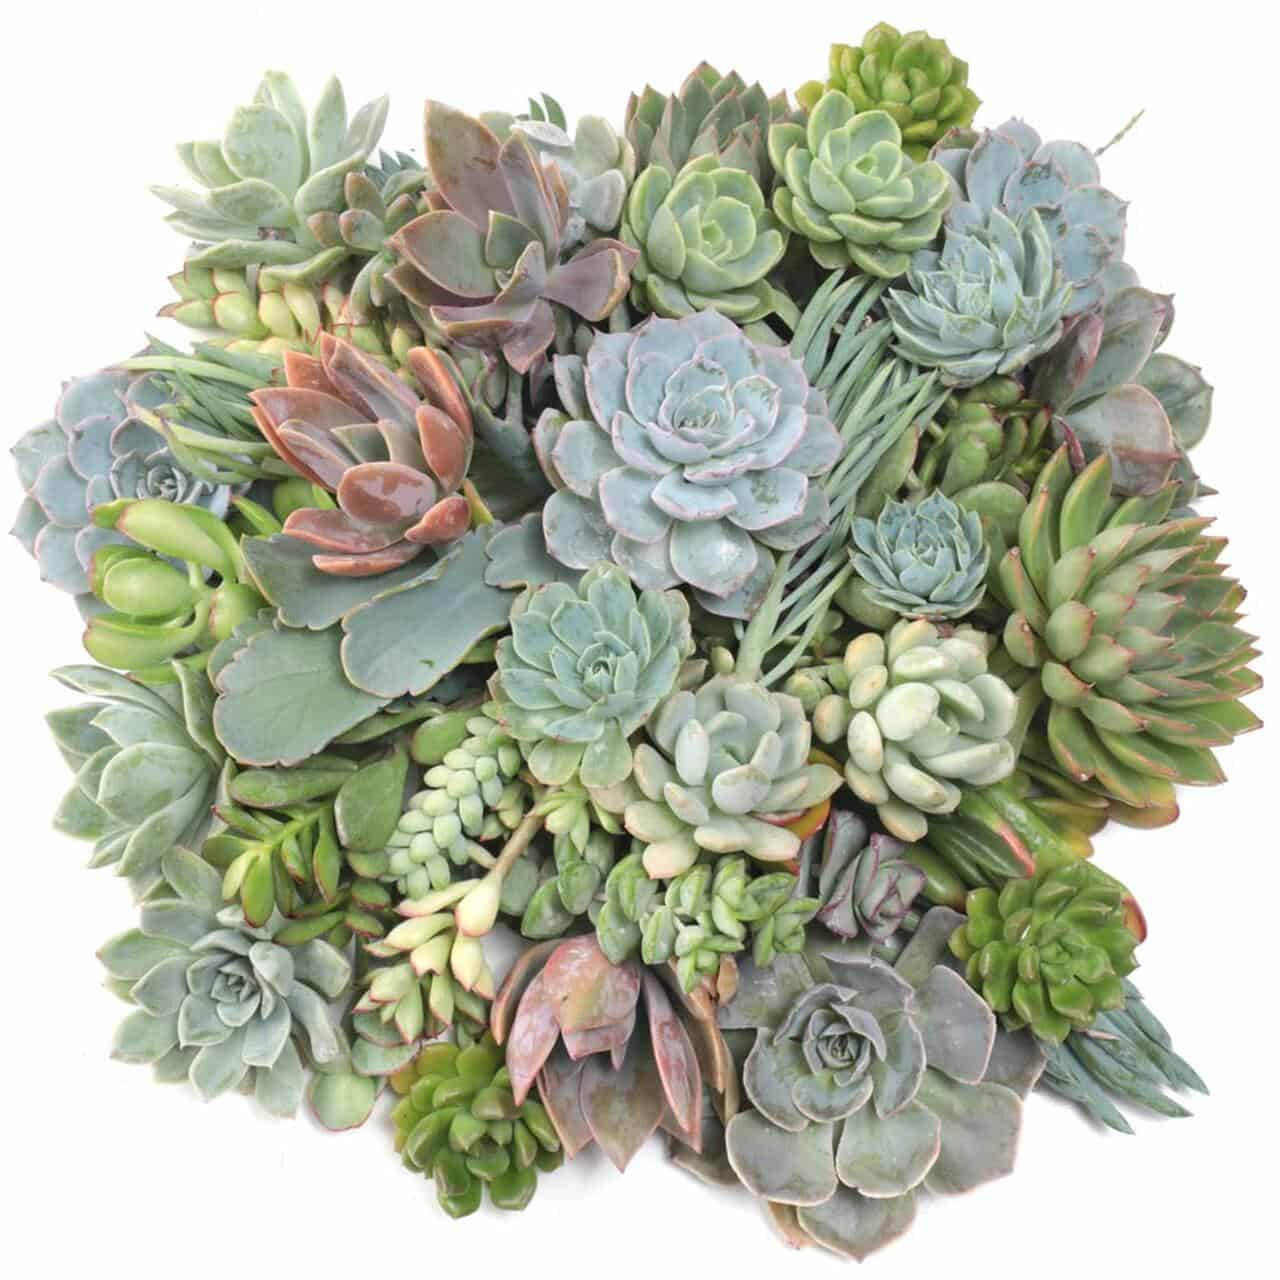 MCG Super Succulent Sampler™ Tray - 2in Containers - 25 Varieties (25)